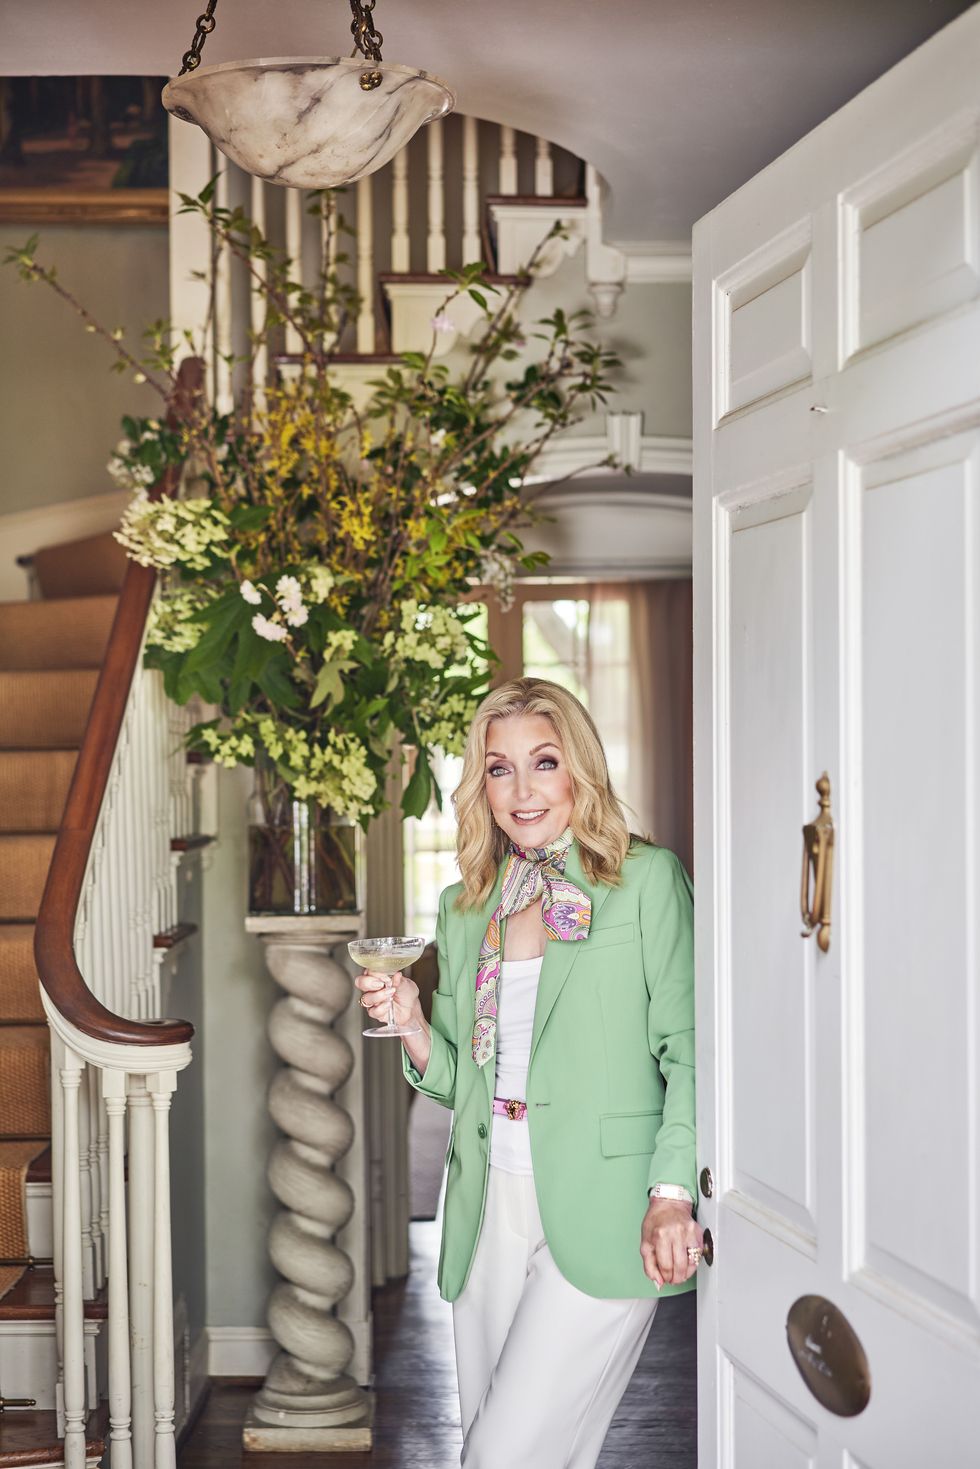 the interior designer welcomes guests into her 1930s home with a cool glass of champagne